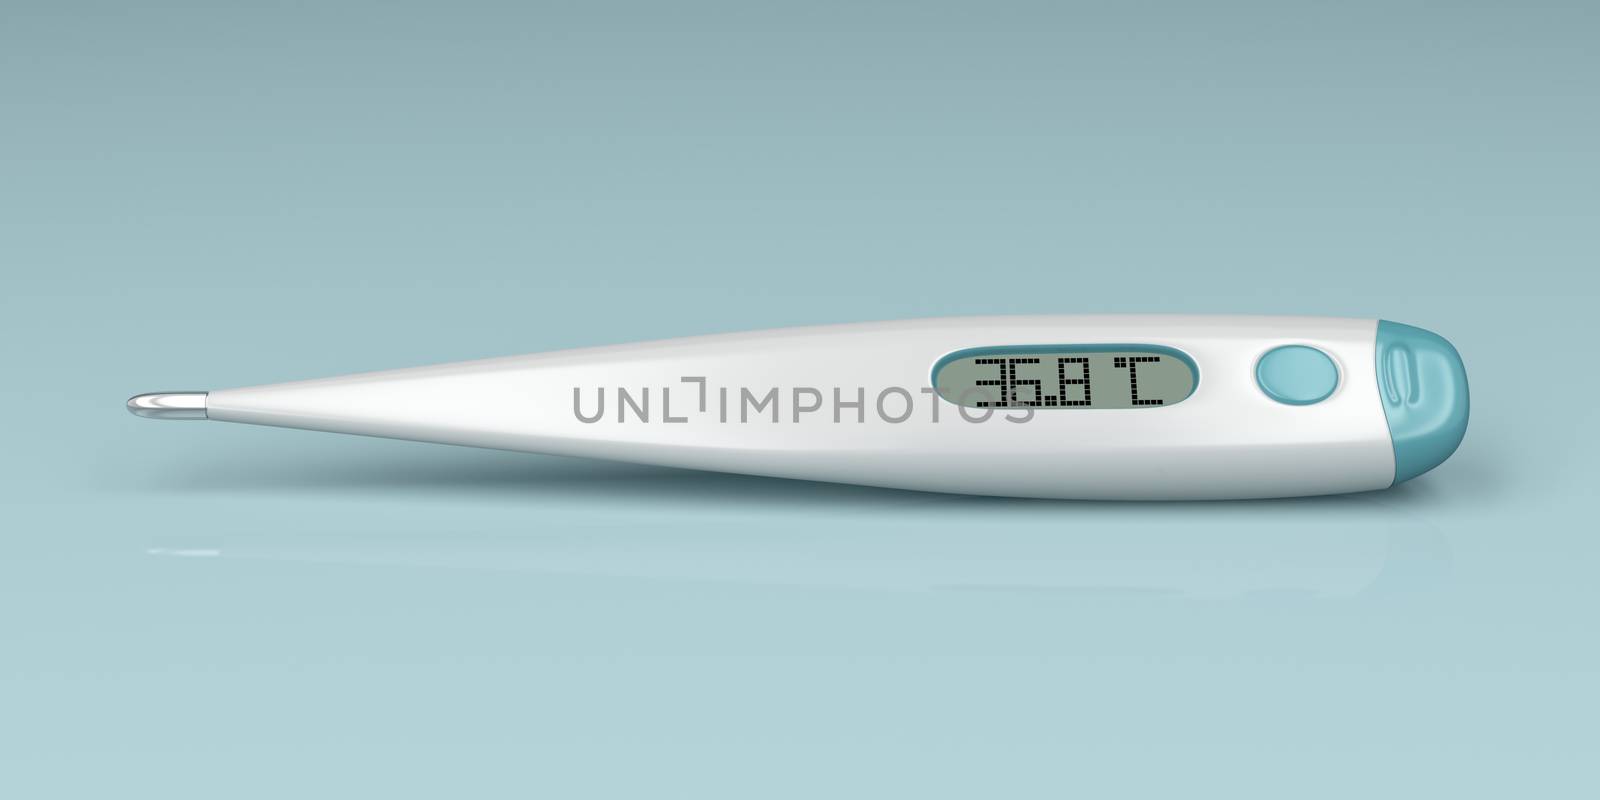 Digital thermometer, 3d rendered image